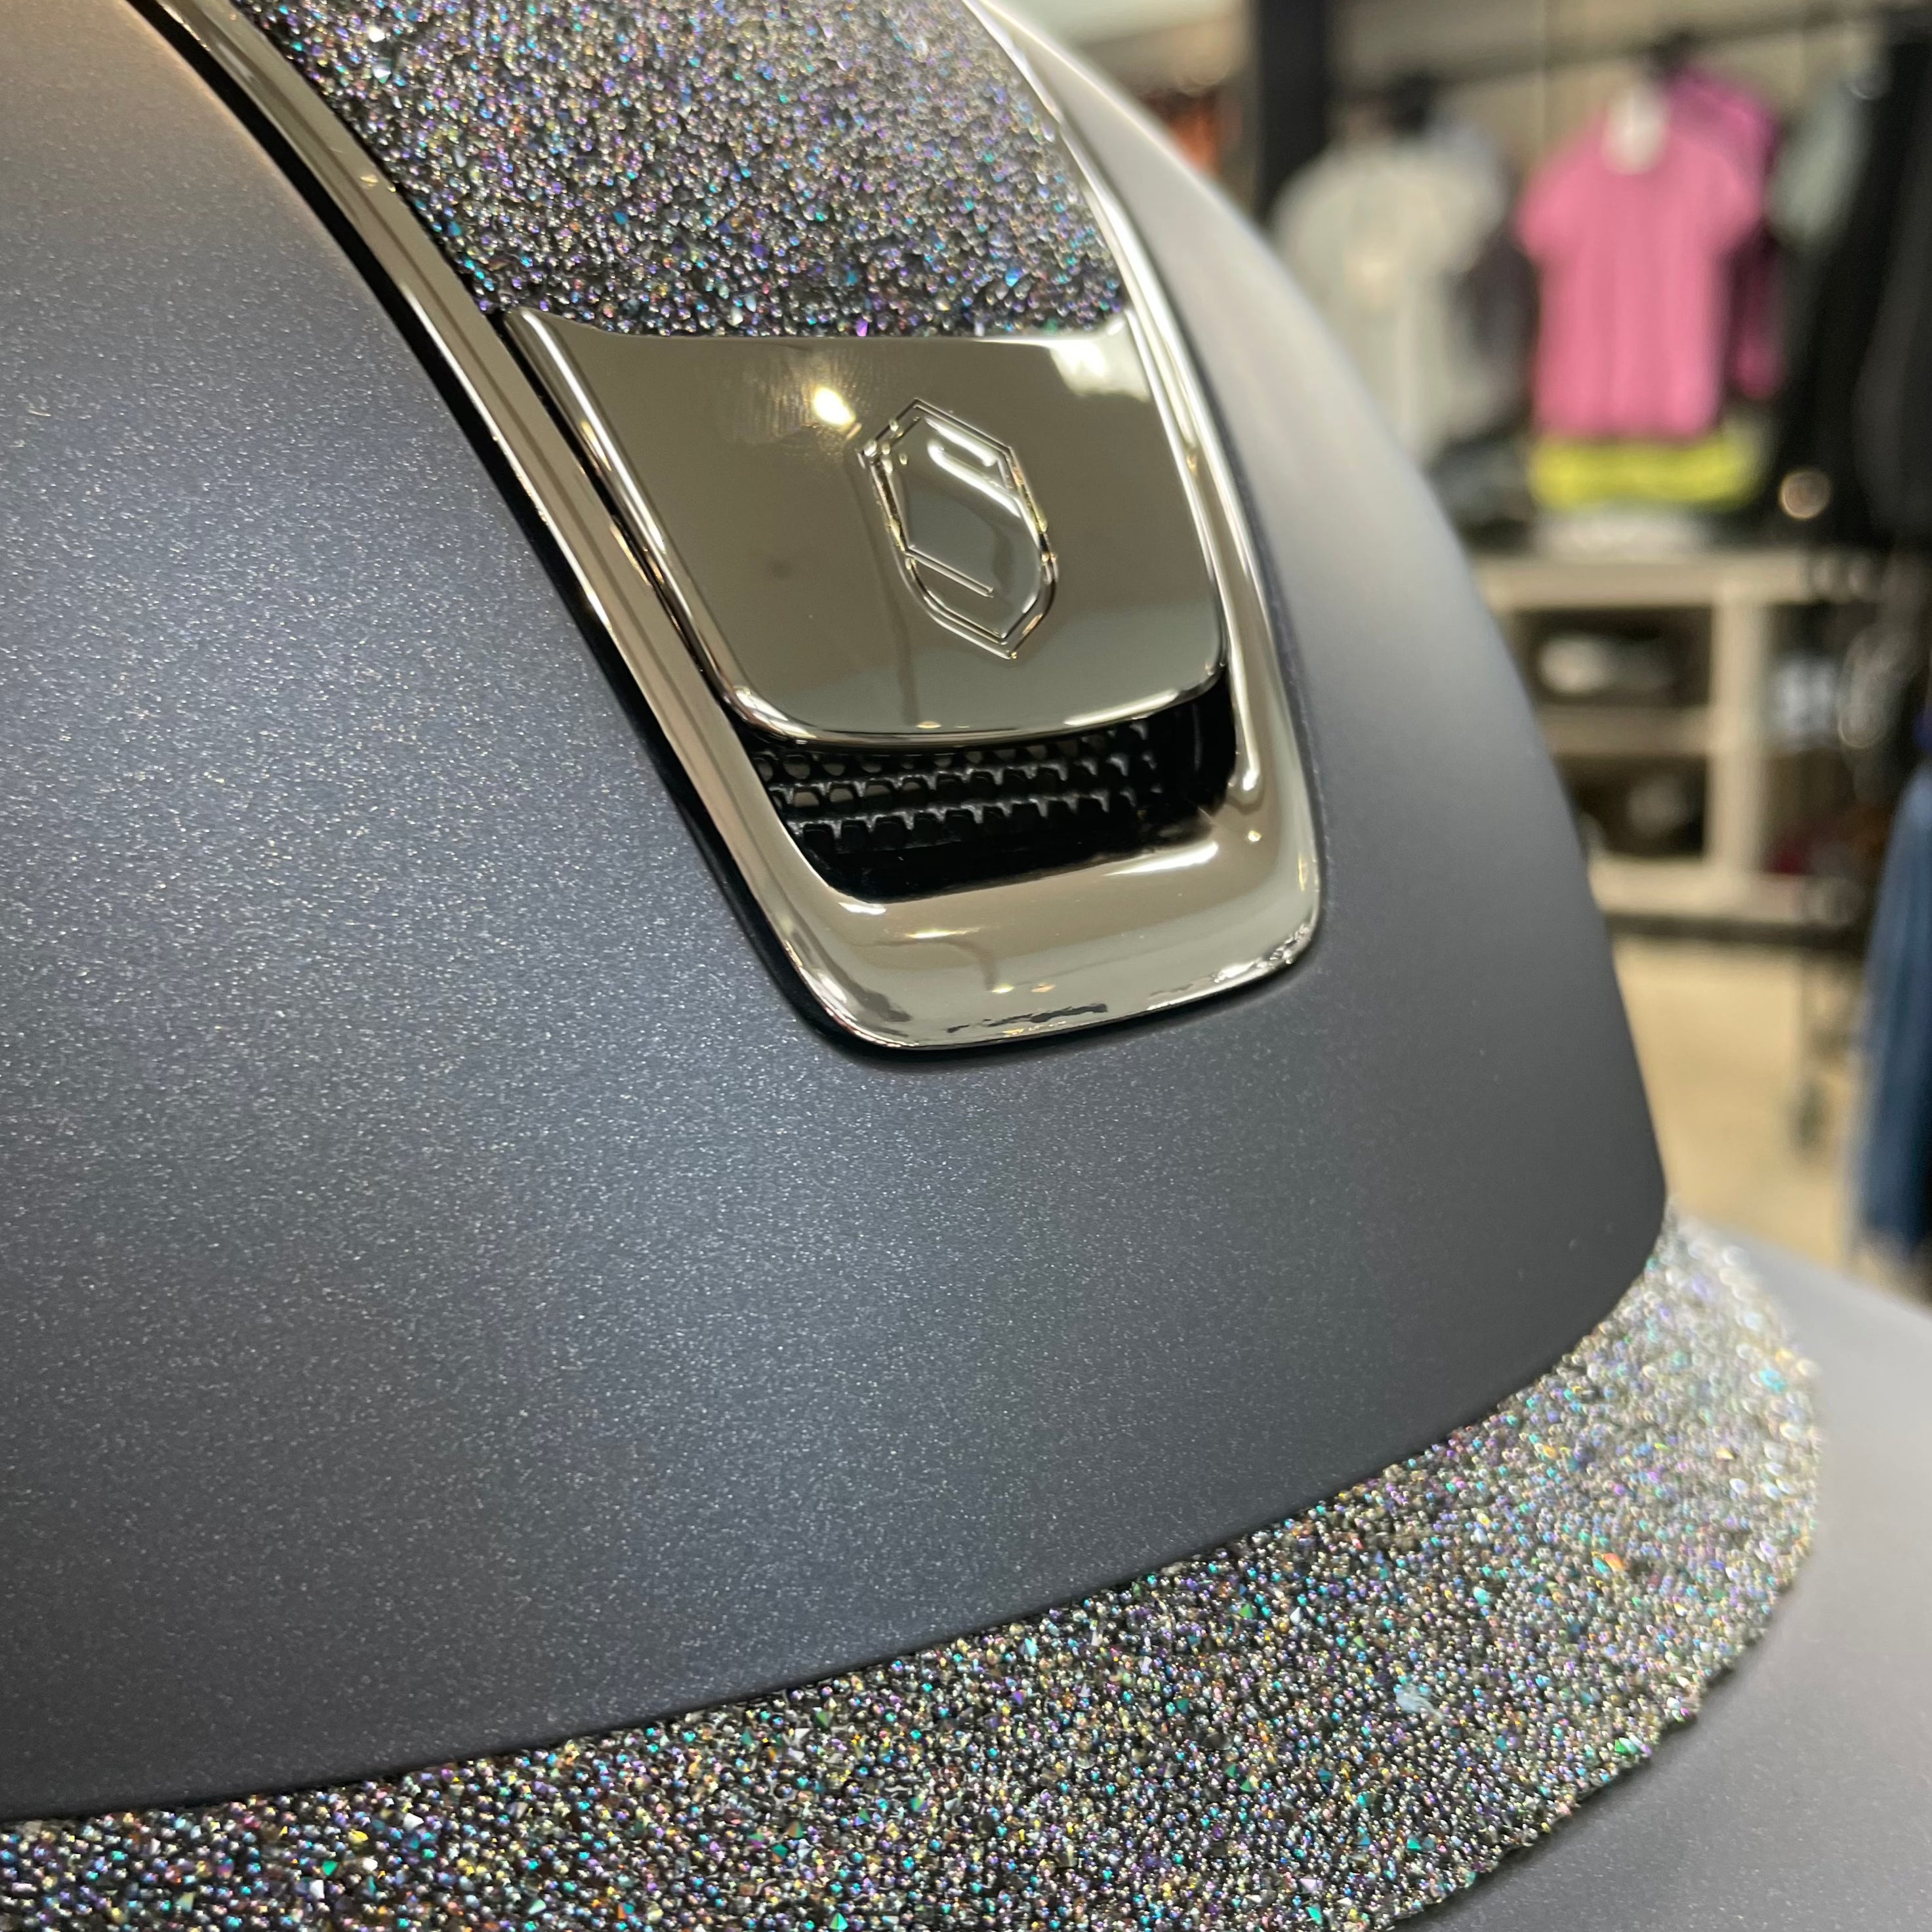 Samshield MissShield Blue with Swarovski paradise shine top and frontal band 2.0 L- in stock and ready to ship!